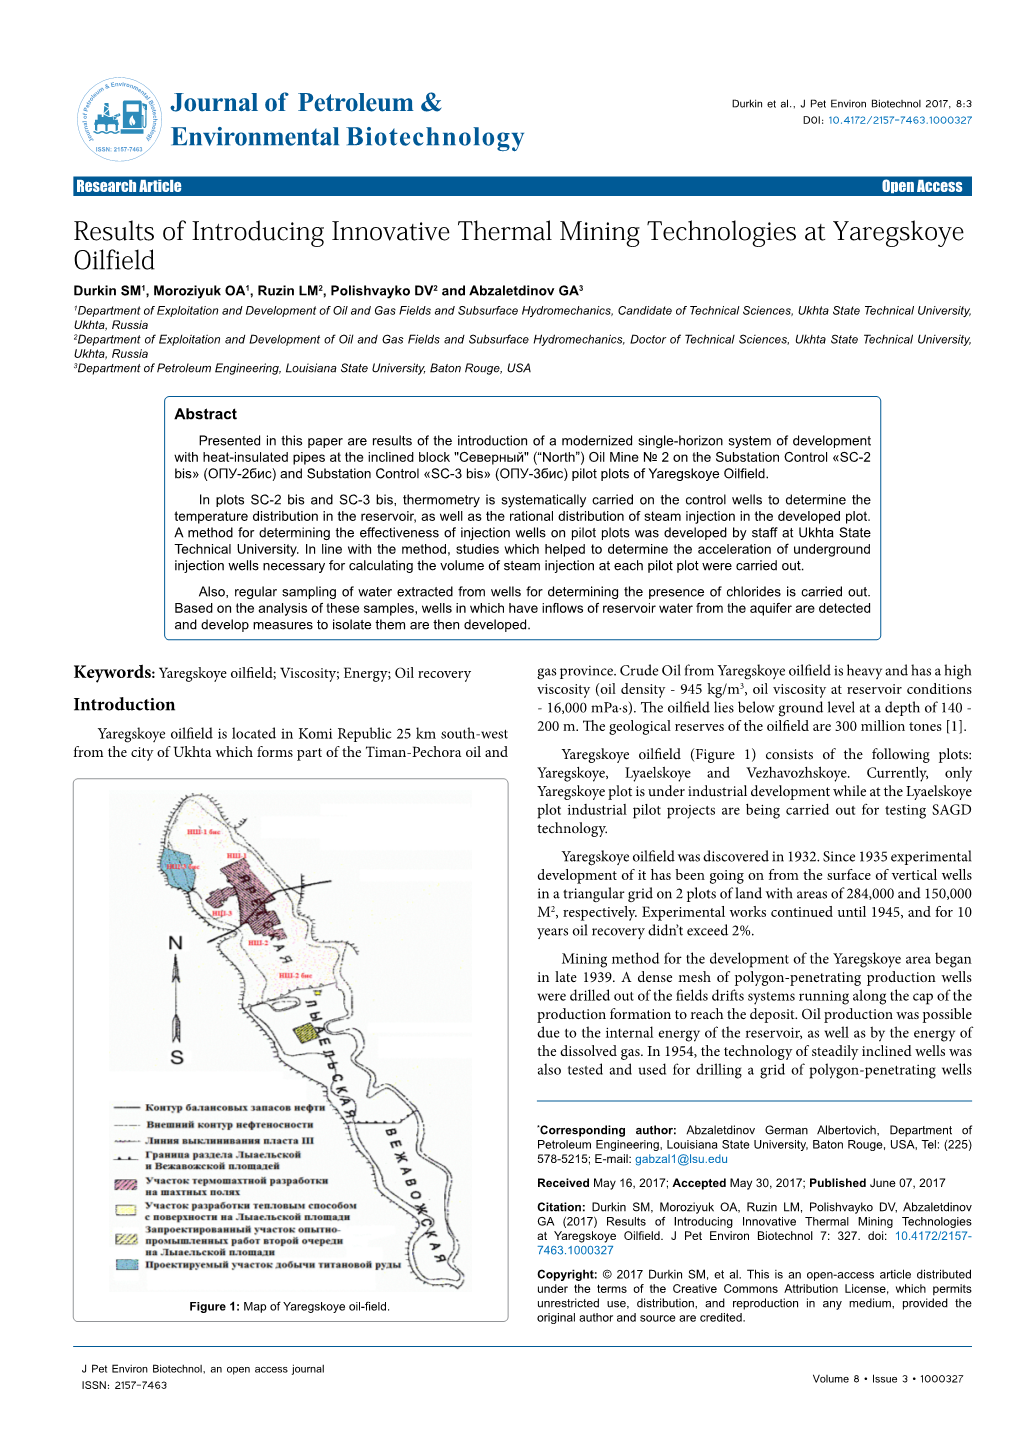 Results of Introducing Innovative Thermal Mining Technologies At